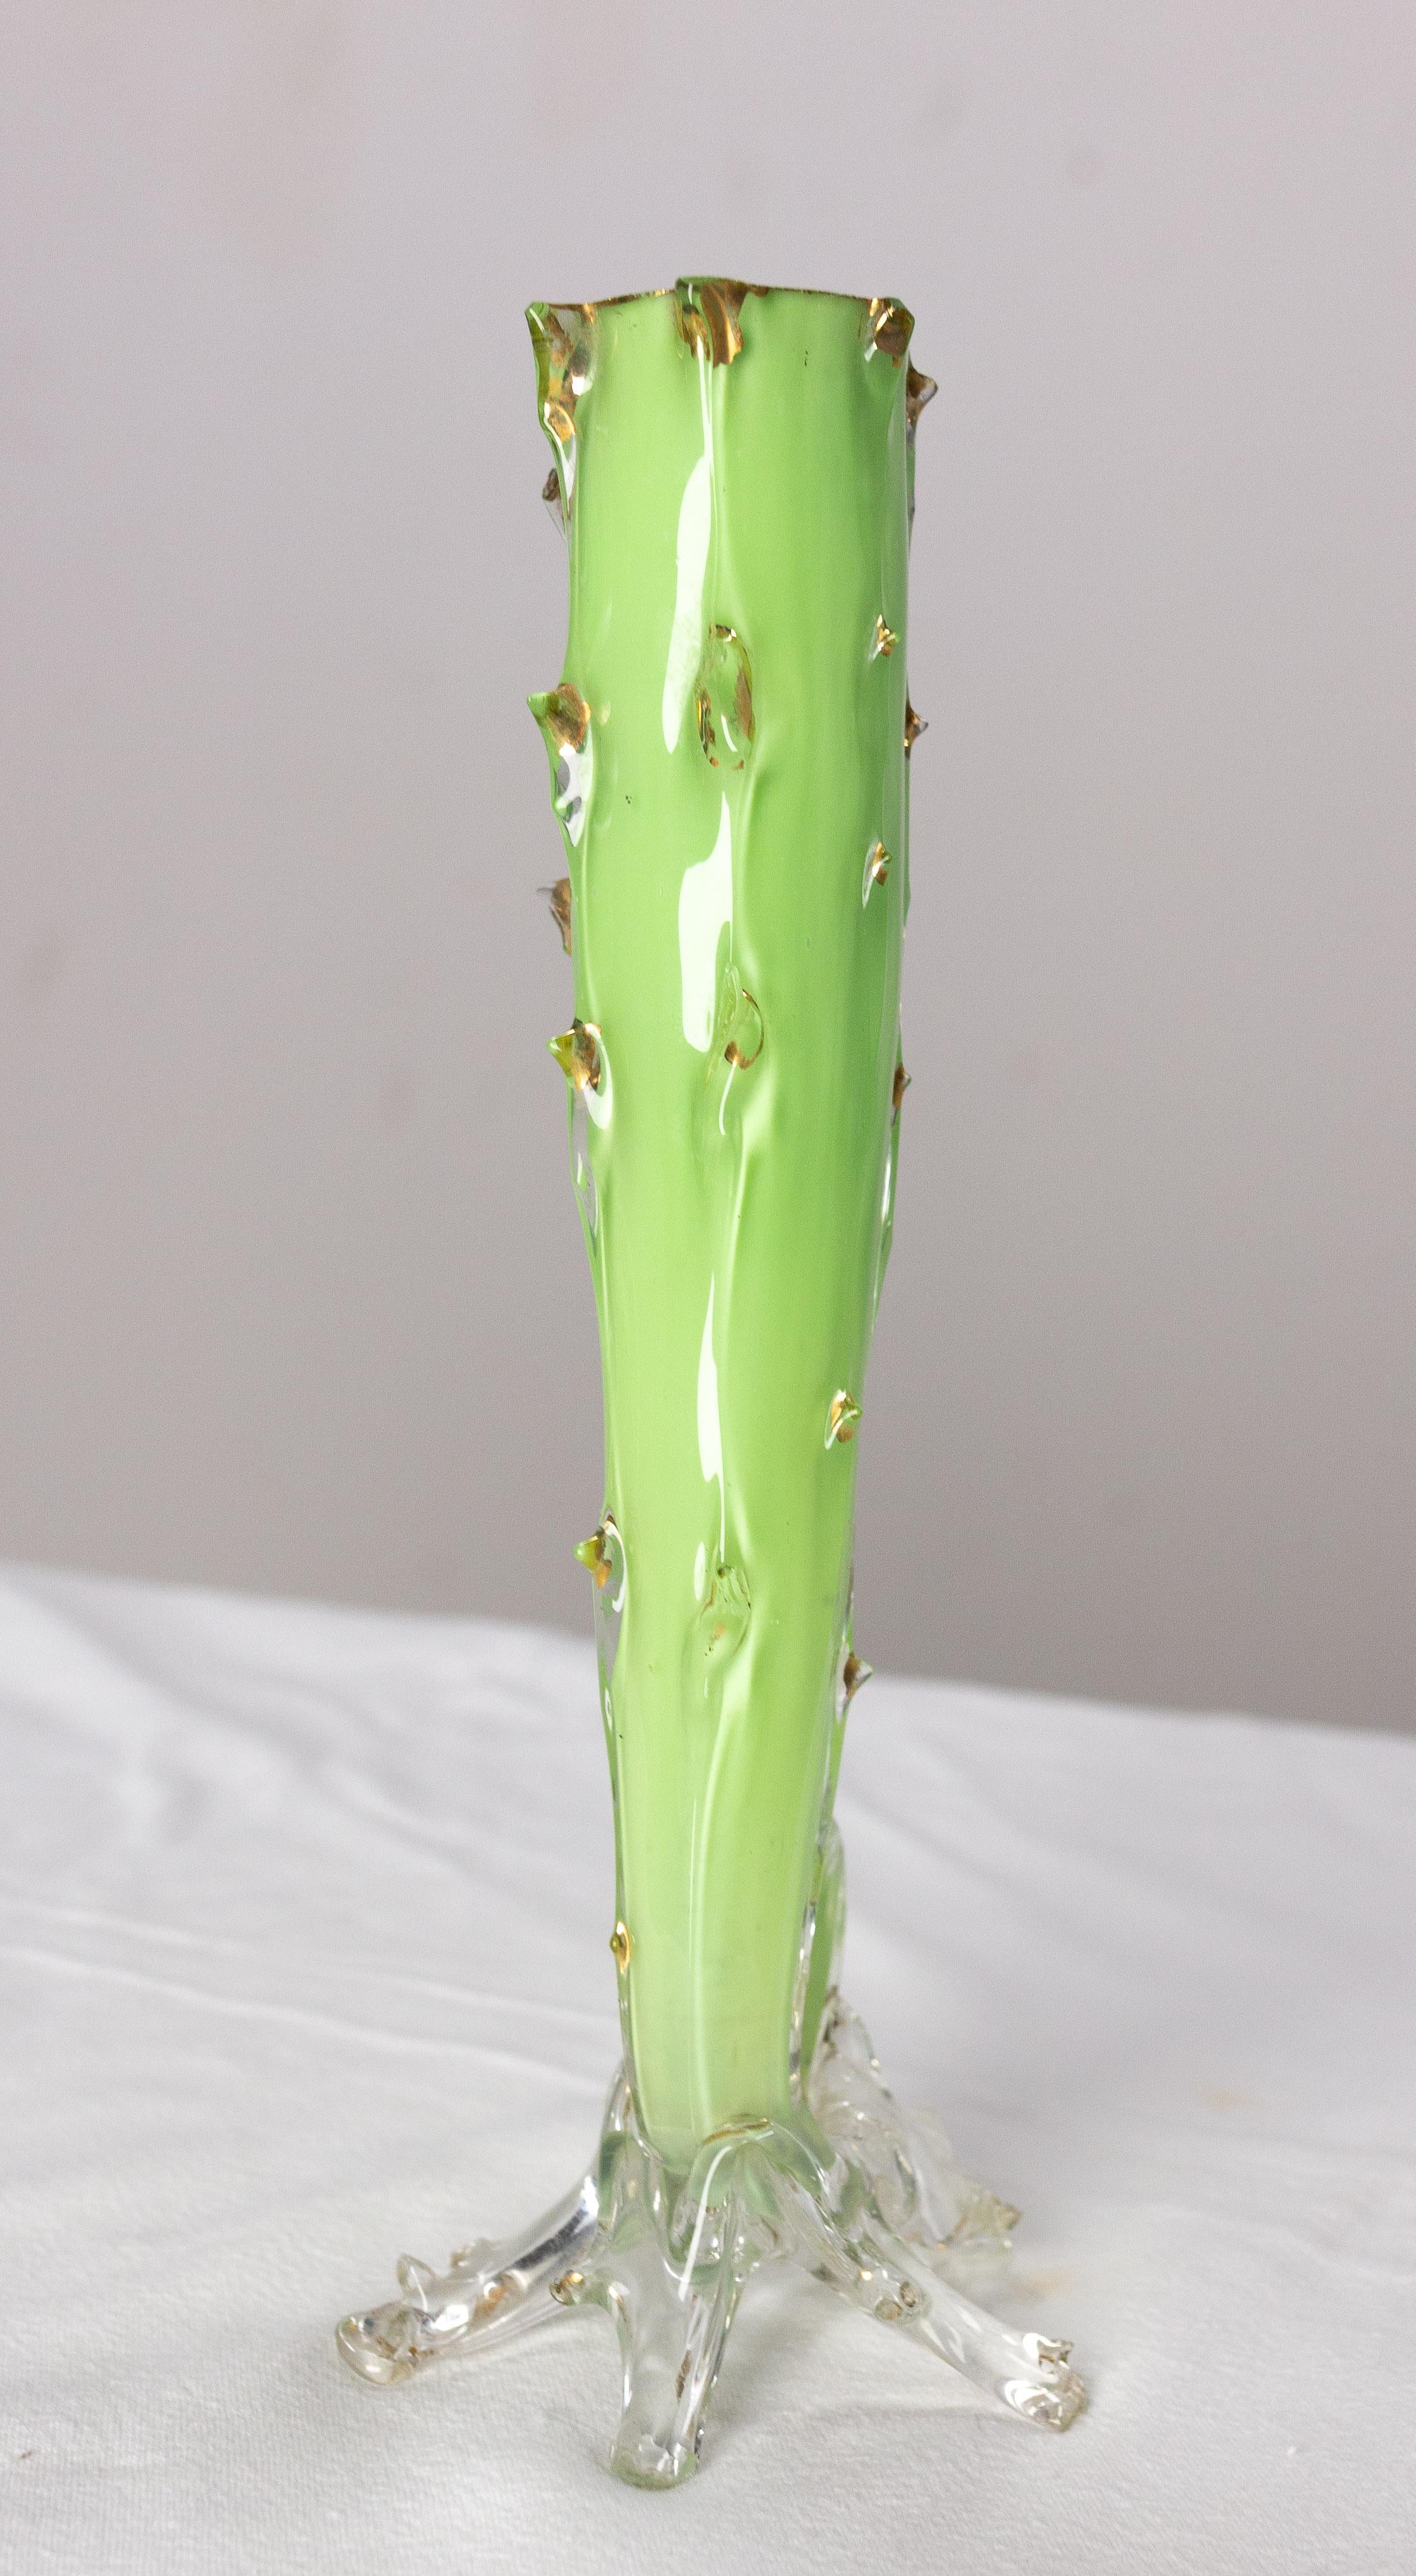 Mid-Century Modern French Vase Soliflor Green and Golden Glass, Imitation of a Rose Stem, C. 1960 For Sale